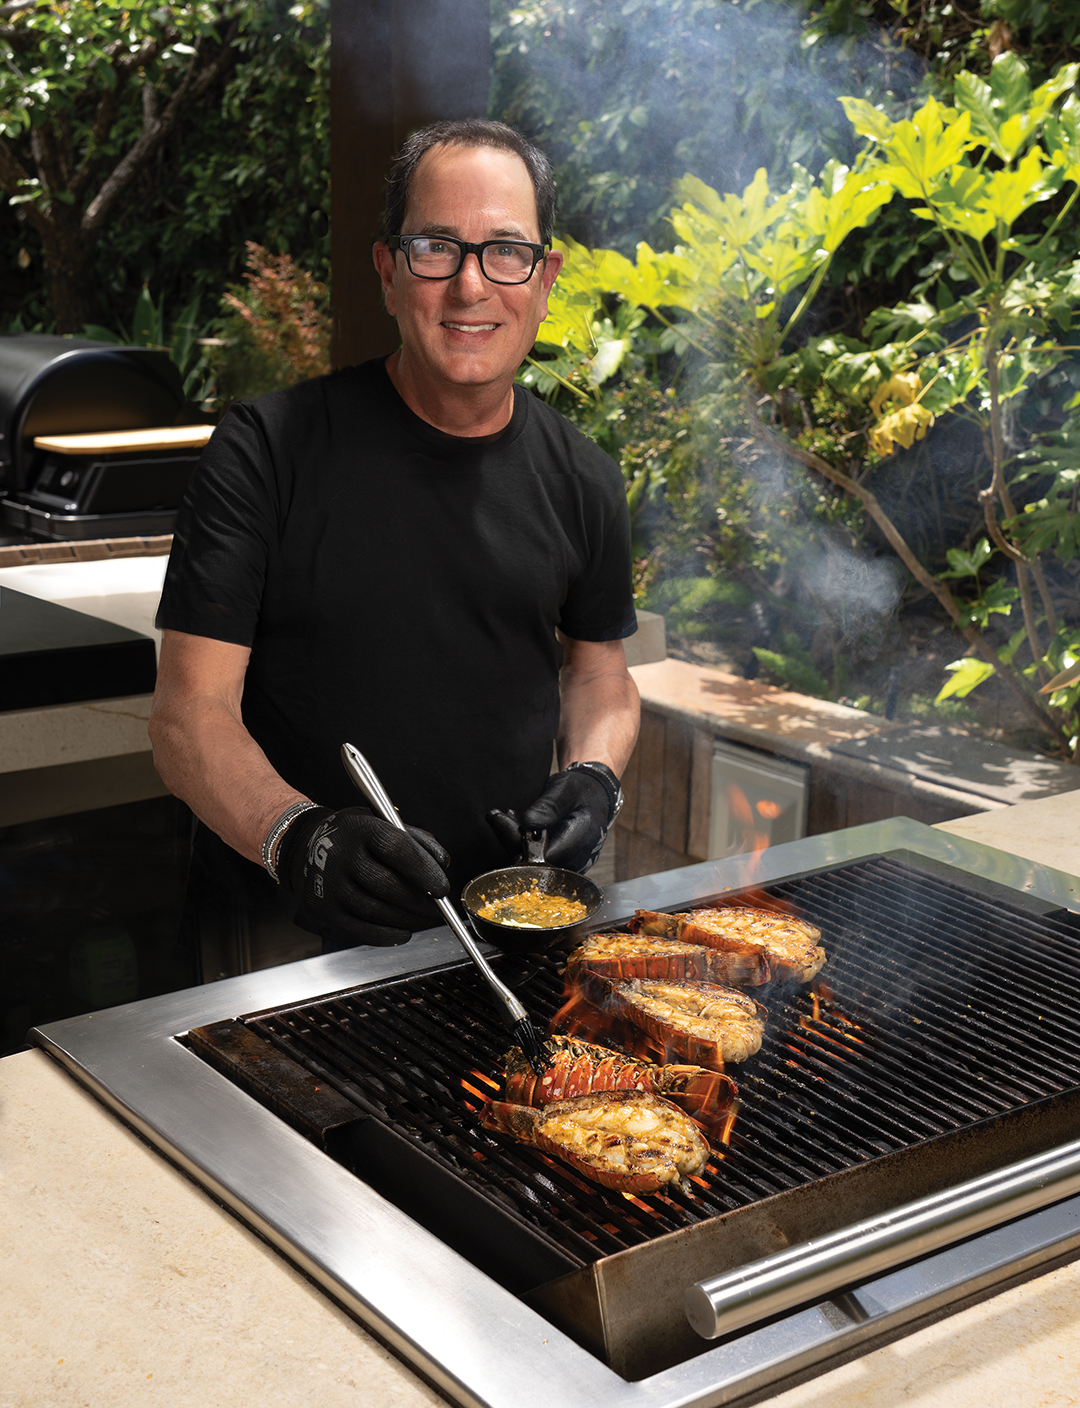 BBQ Science: The chemistry of cooking over an open flame - URNow